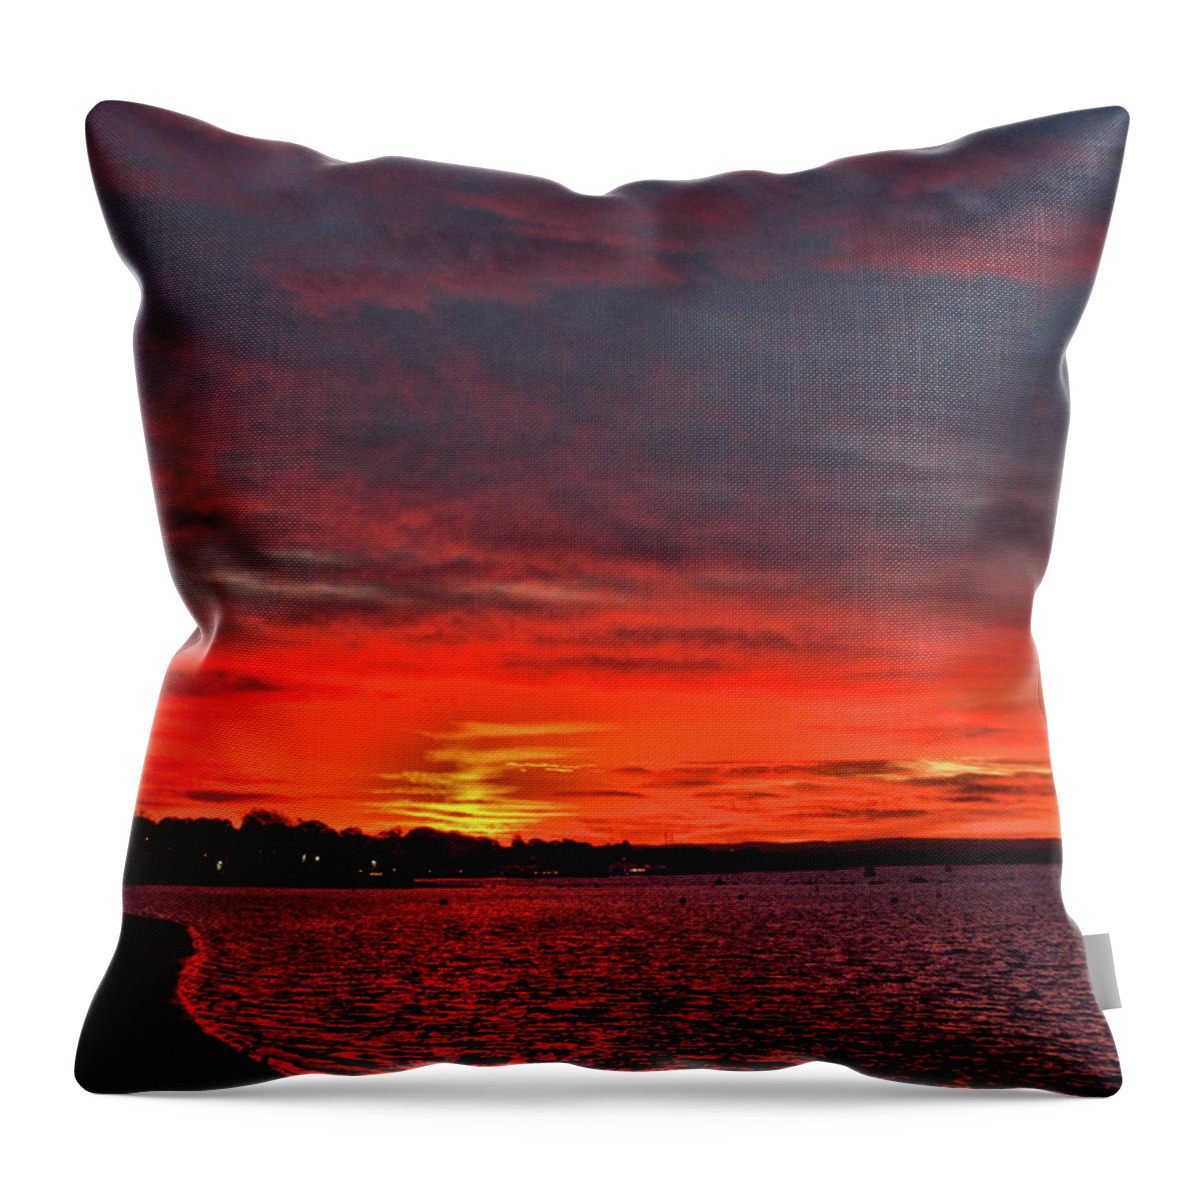 Pier Throw Pillow featuring the photograph Sunrise Onset Pier by Bruce Gannon